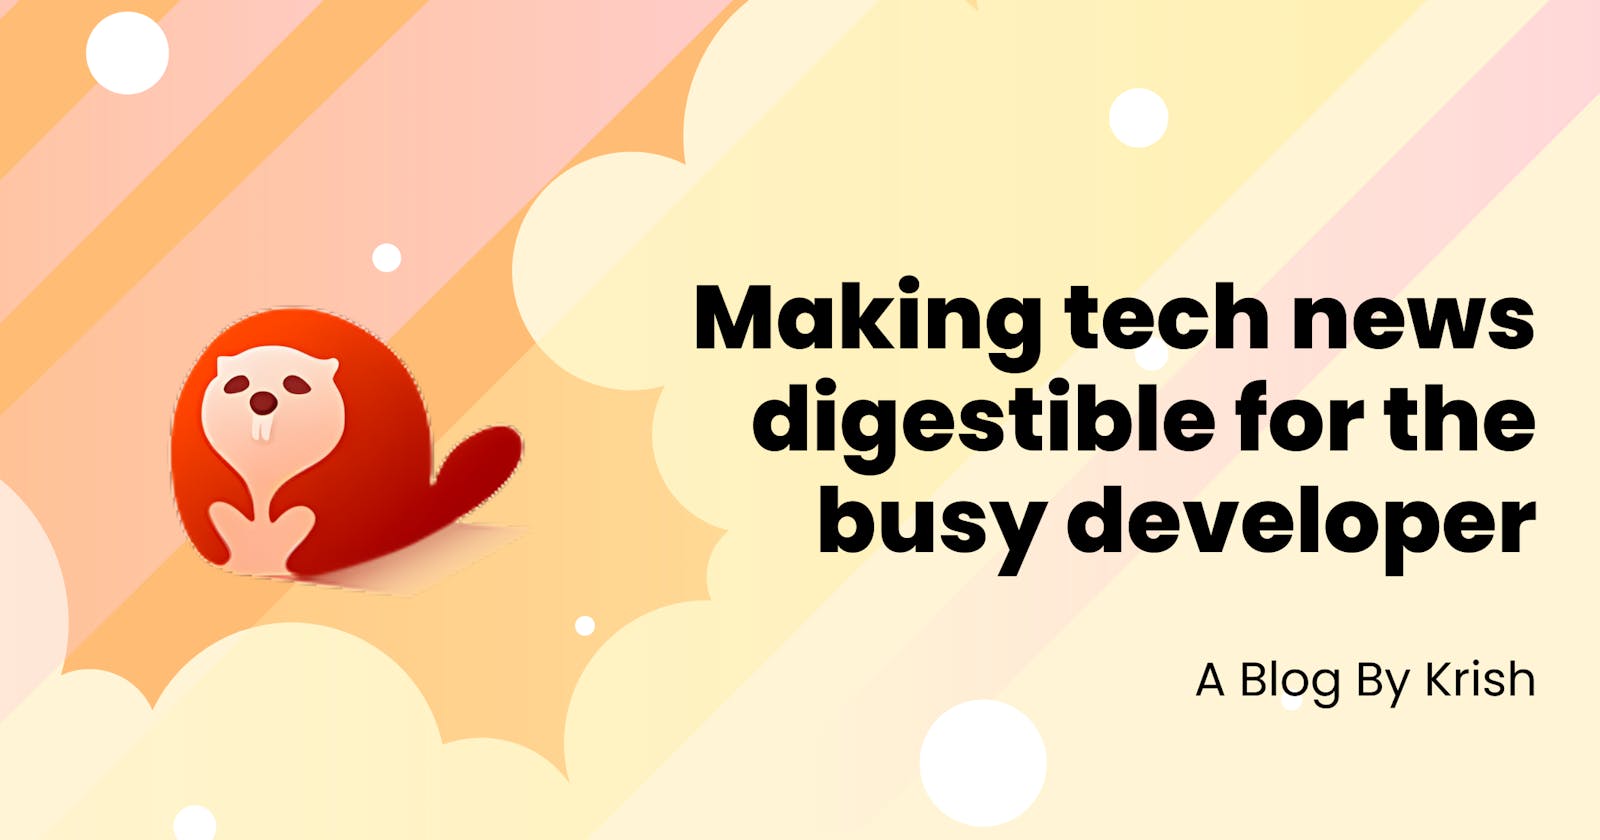 DevBytes - Know What's Happening In The Tech Industry In Just 64 Words!